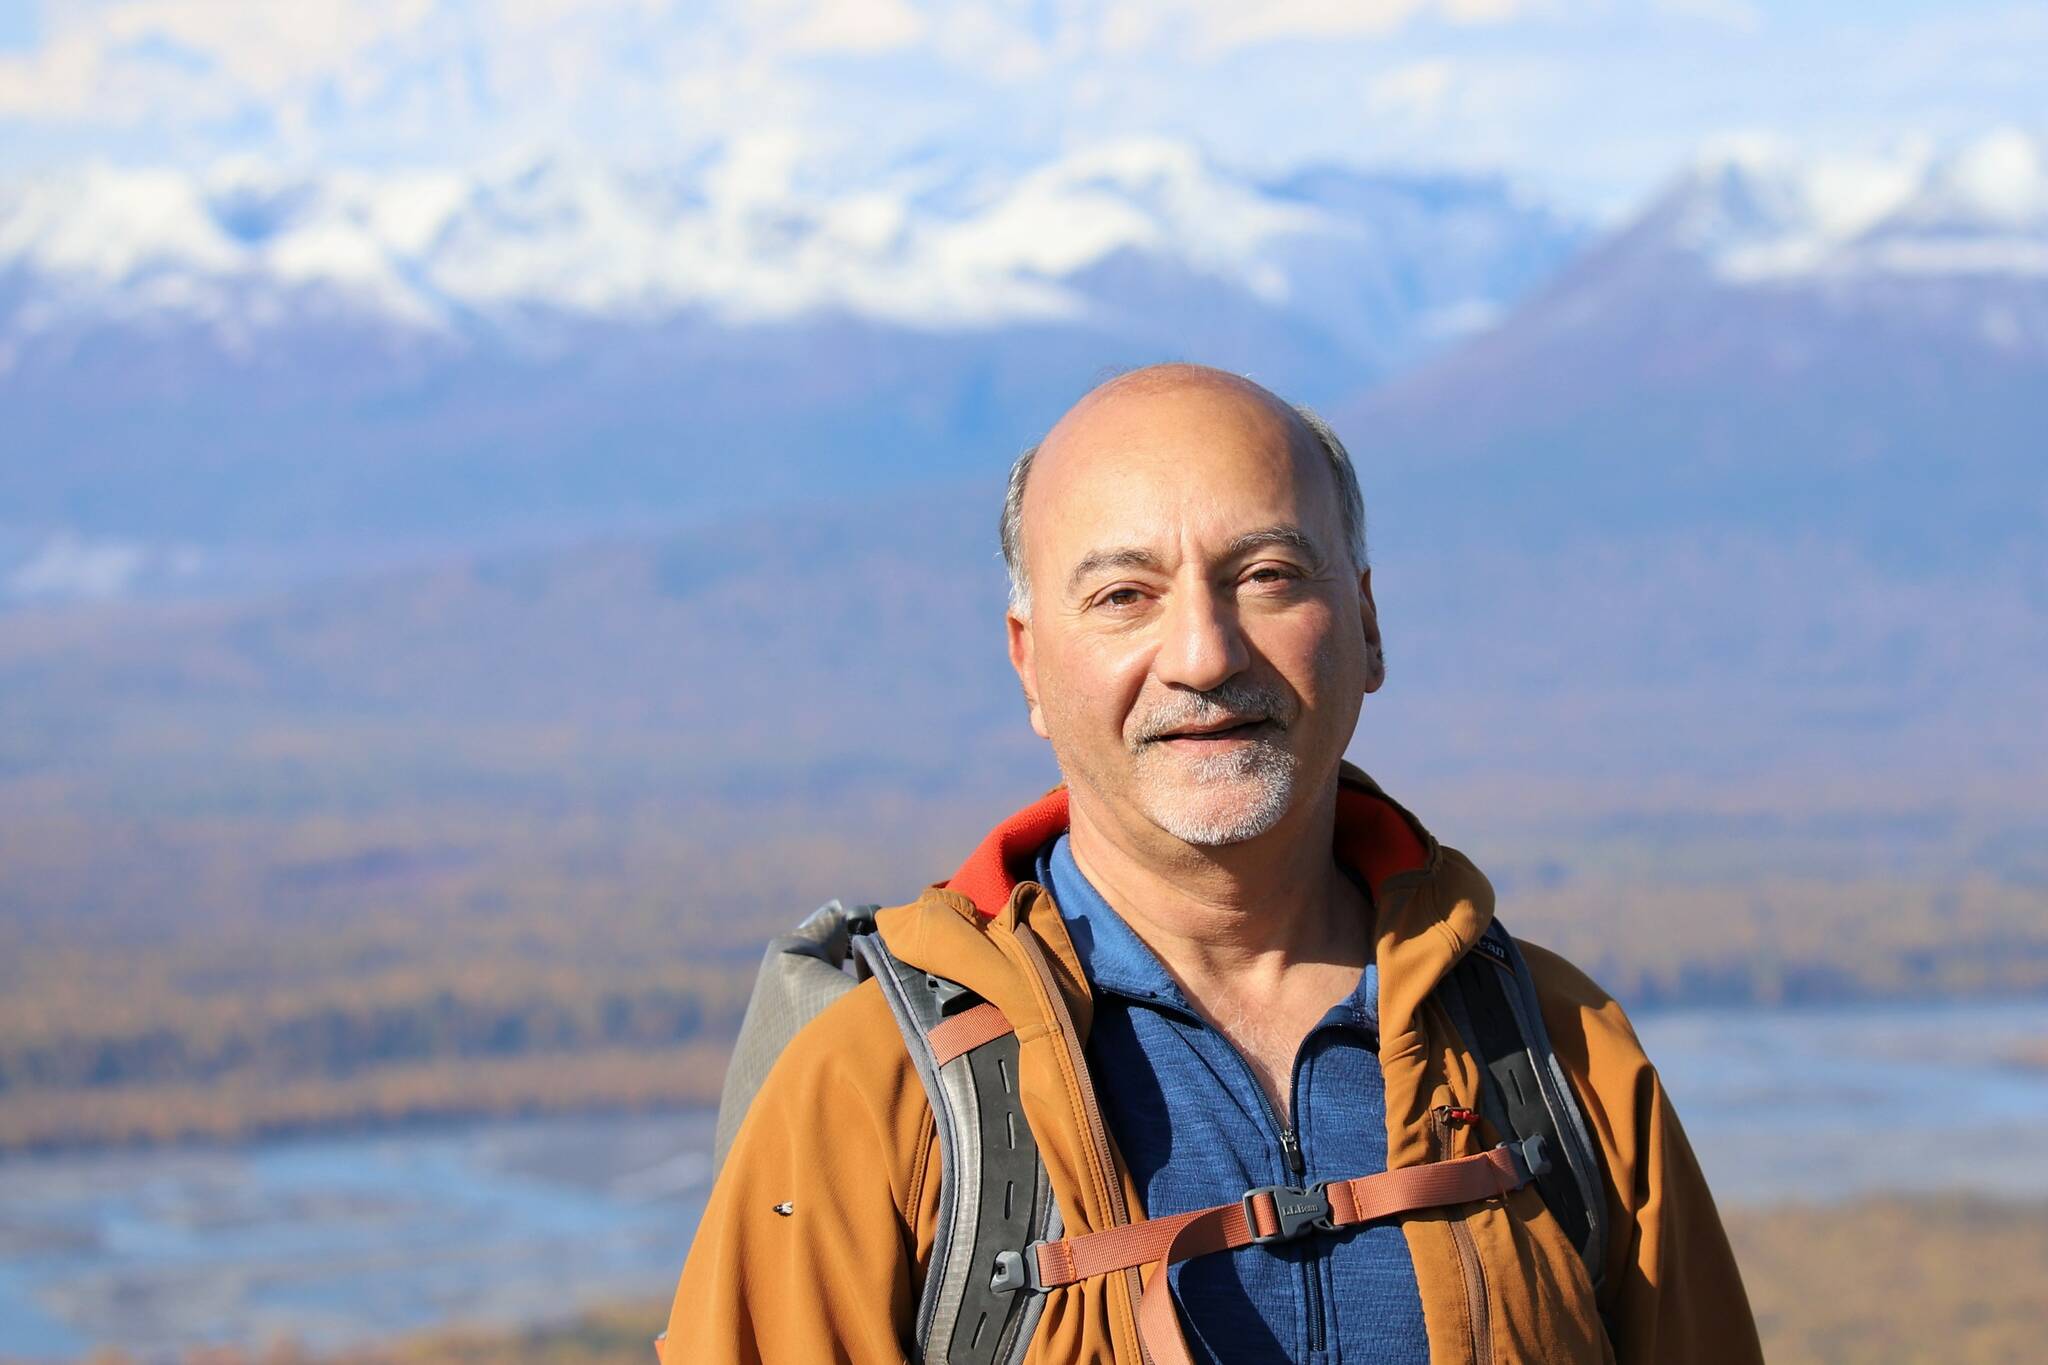 Les Gara, who represented Anchorage in the Alaska House of Representatives from 2003-2018, is running as a Democrat to unseat Gov. Mike Dunleavy in the 2022 general election. He told the Empire in an interview he wanted to ensure oppportunities were available in Alaska in the future. (Courtesy photo / Les Gara)